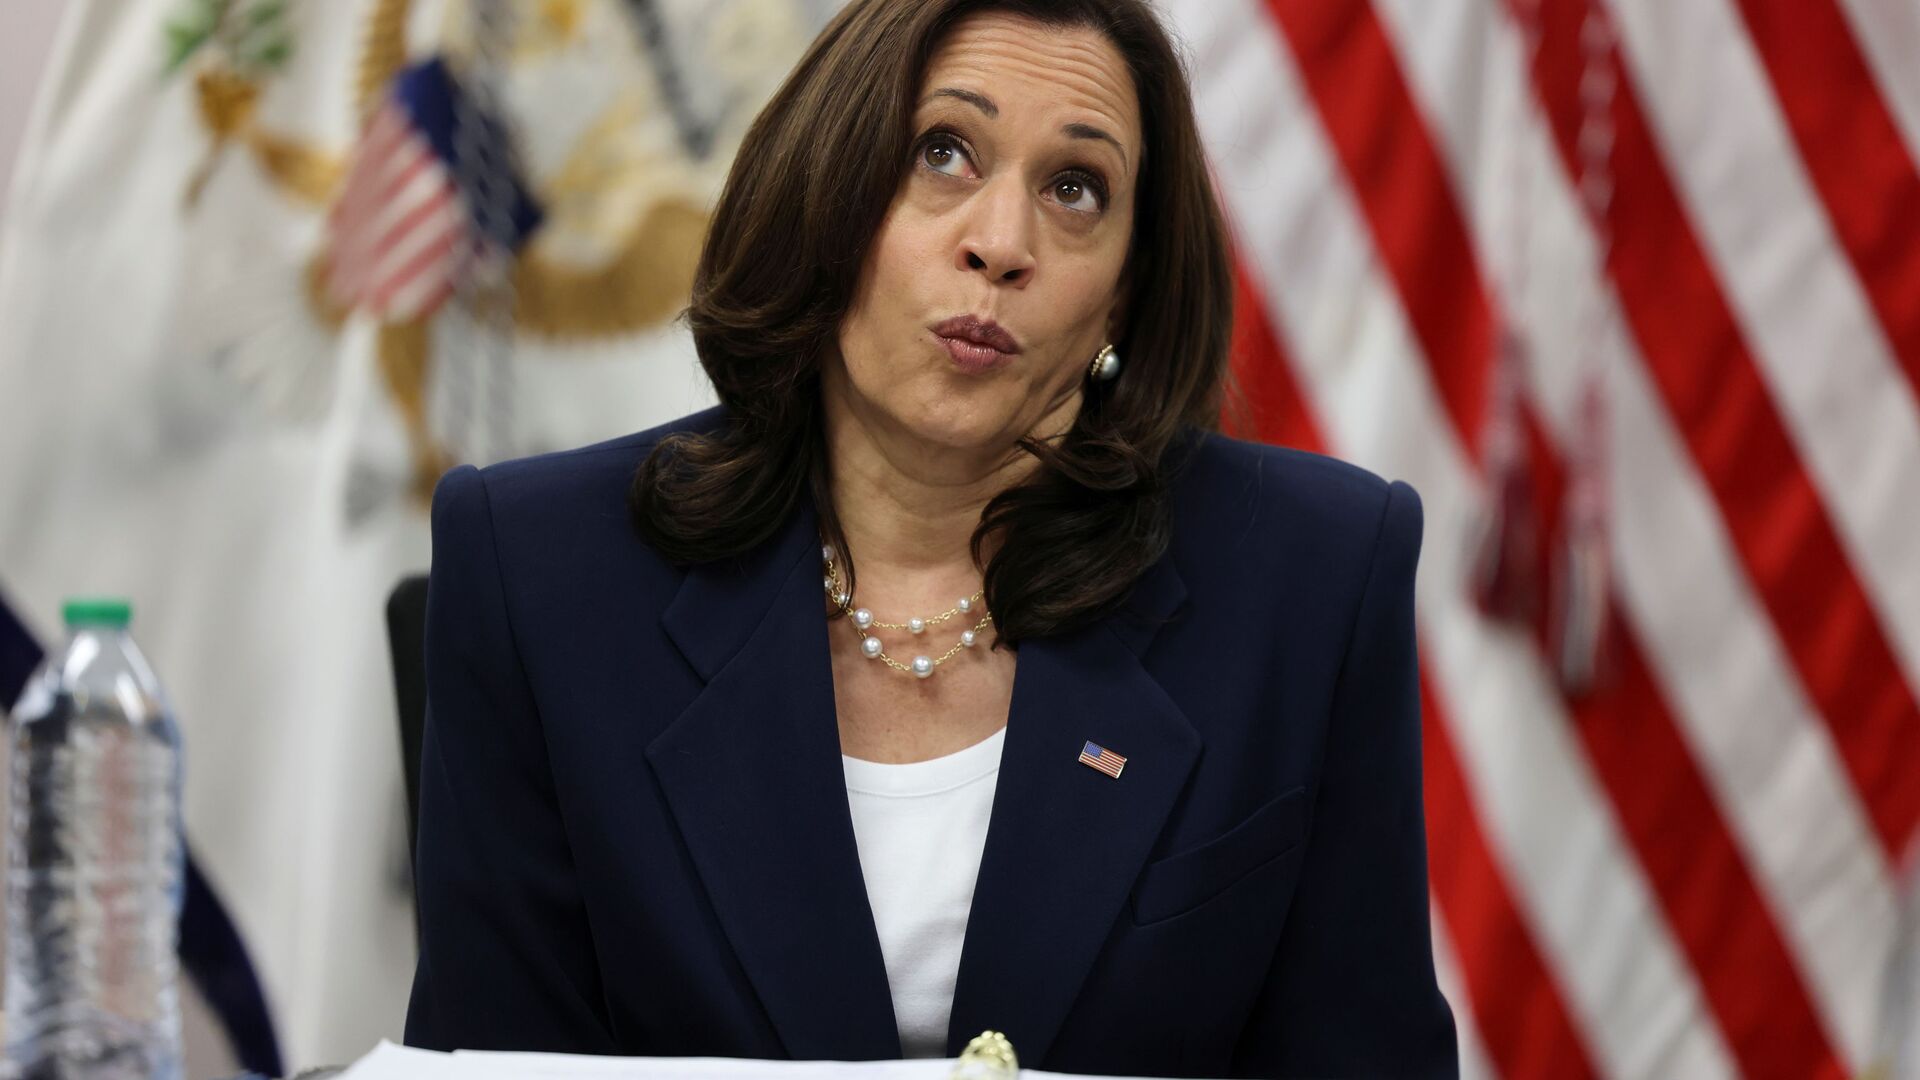 U.S. Vice President Kamala Harris takes part in a round table with faith and community leaders who are assisting with the processing of migrants seeking asylum, at Paso del Norte Port of Entry in El Paso, Texas, U.S., June 25, 2021 - Sputnik International, 1920, 08.09.2021